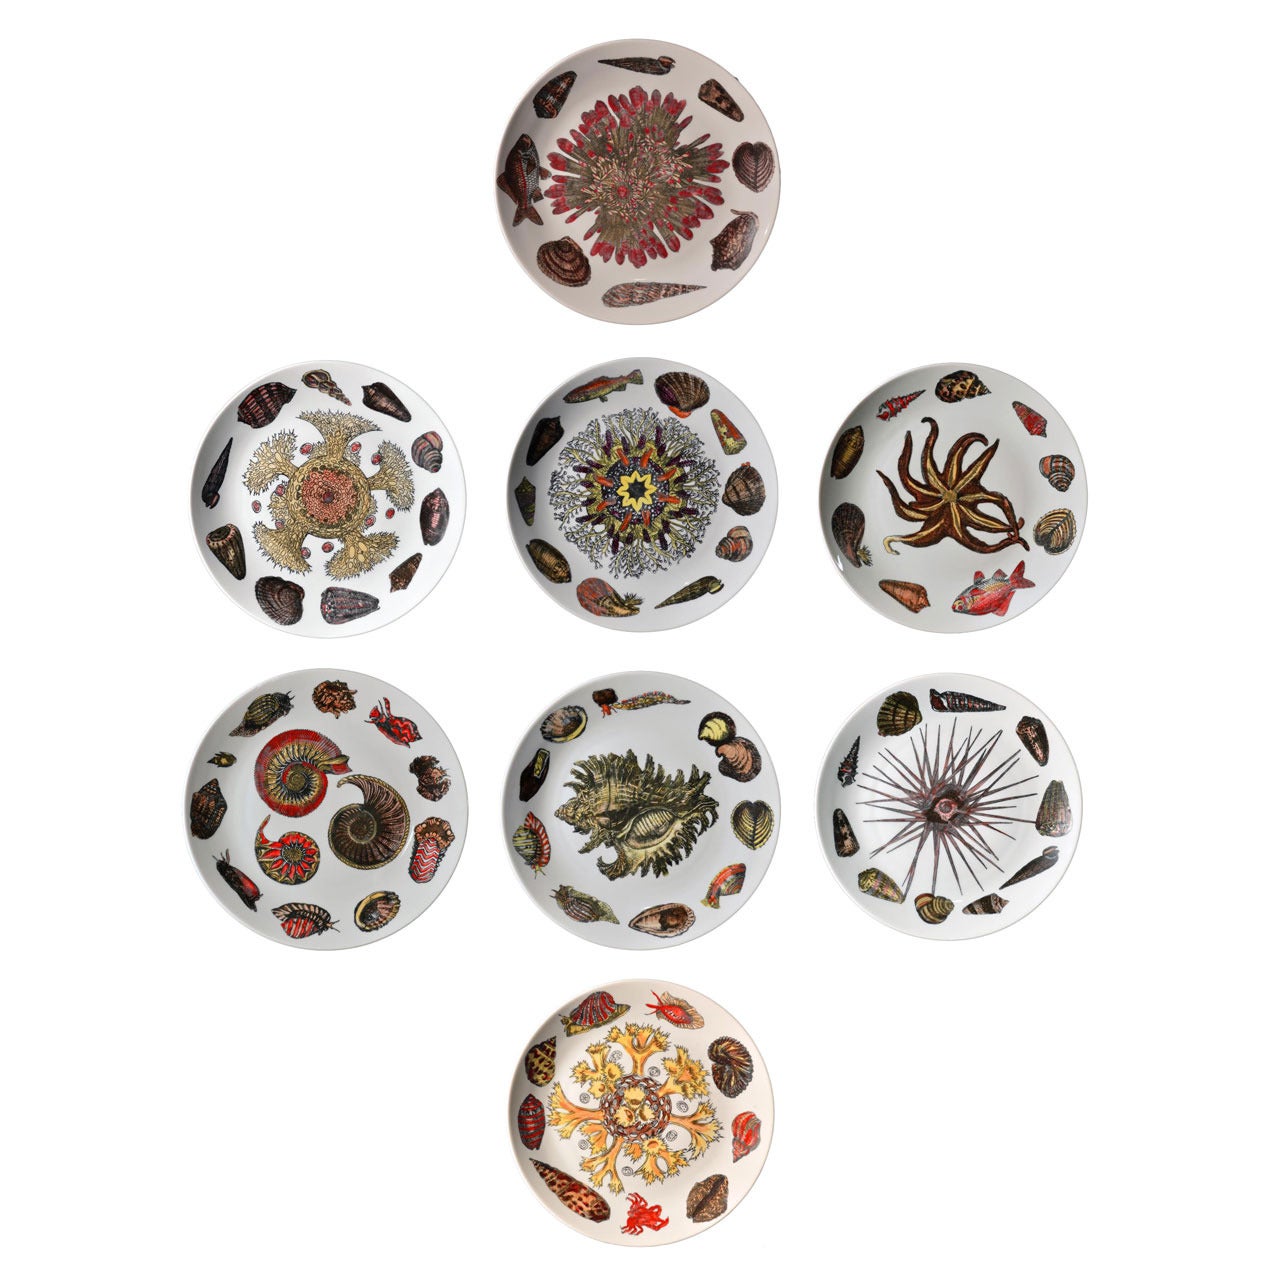 Eight Rare Piero Fornasetti Dishes Decorated with Sea Anemones, Urchins & Shells